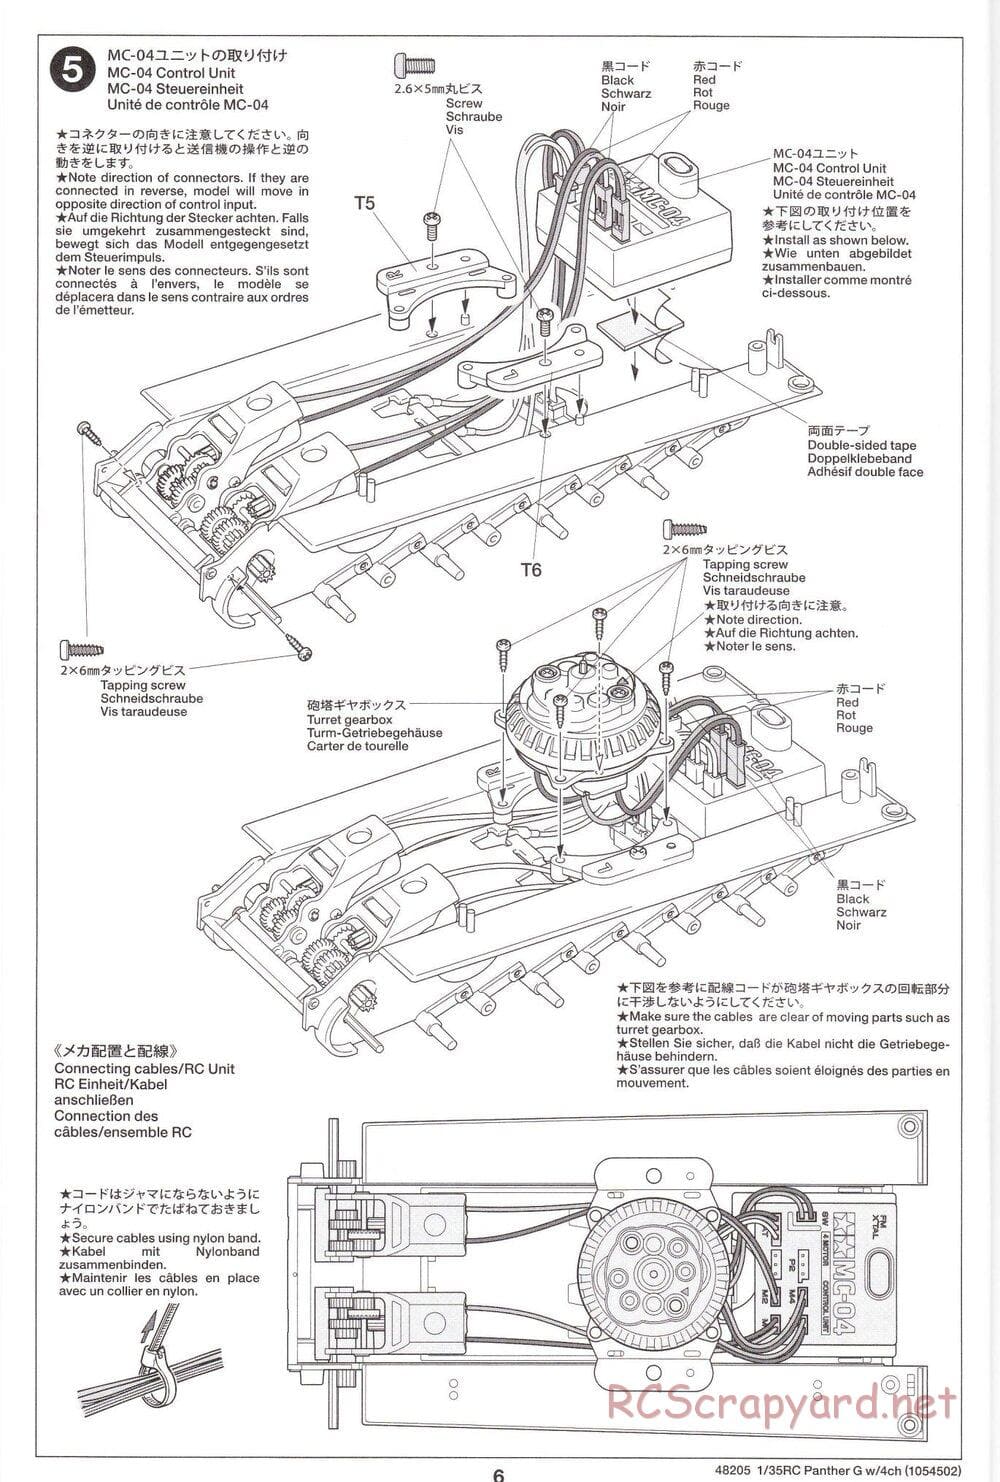 Tamiya - German Panther Type G - 1/35 Scale Chassis - Manual - Page 6